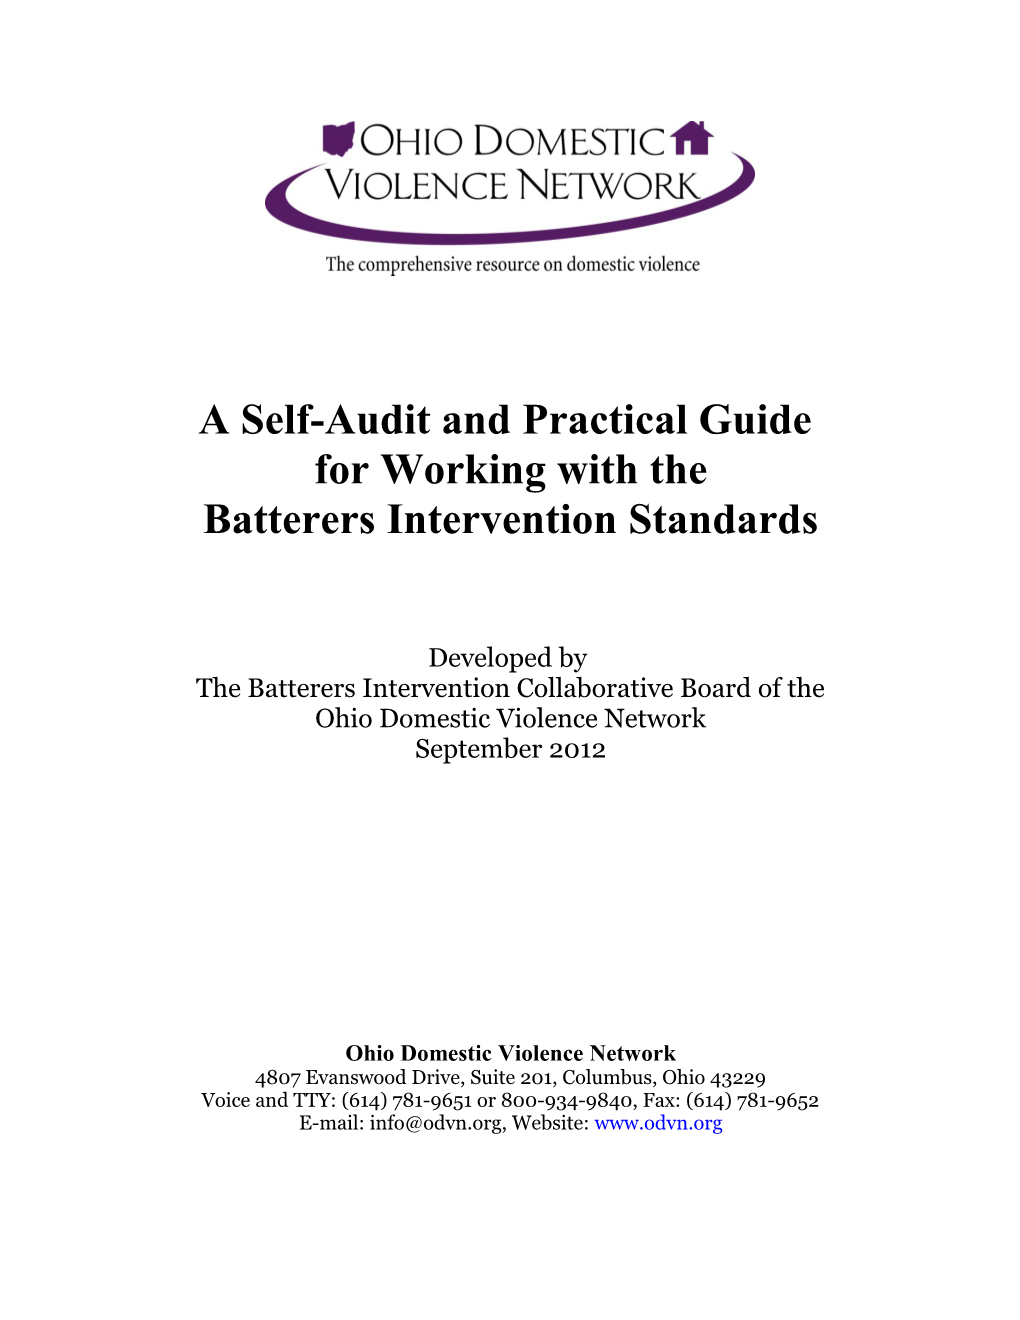 A Self-Audit and Practical Guide